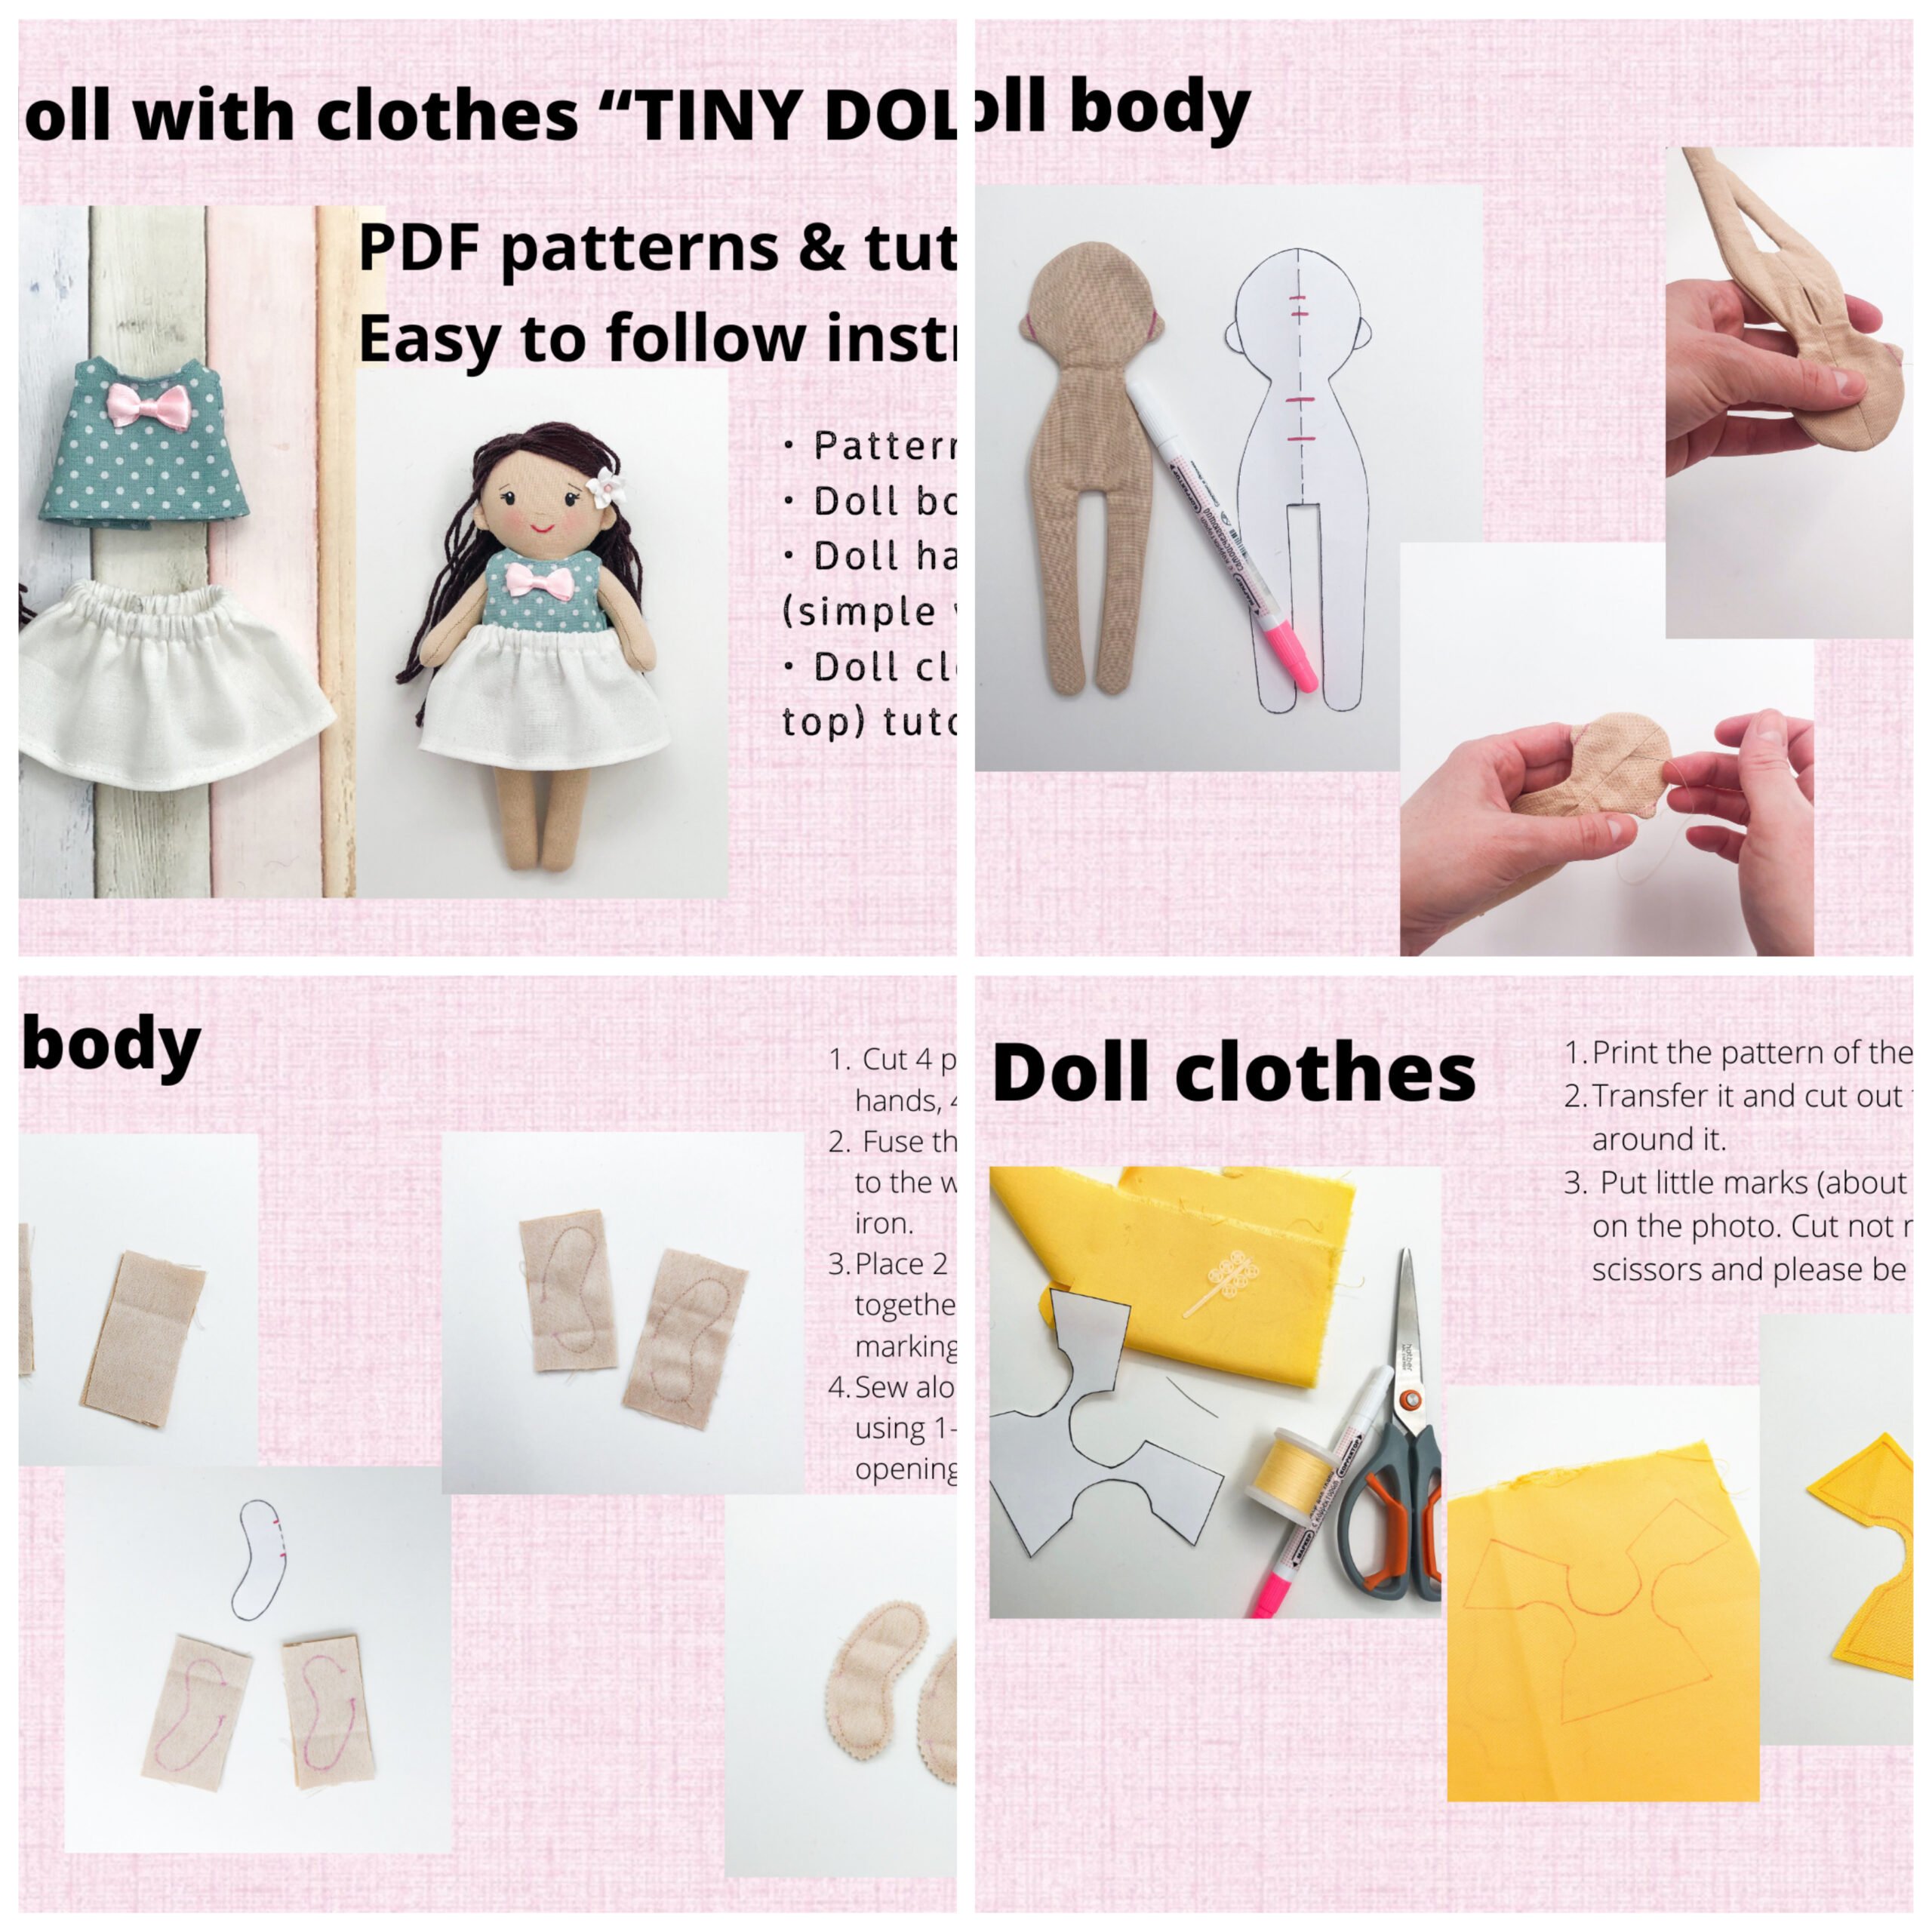 4 Ways to Make Clothes for Your Doll